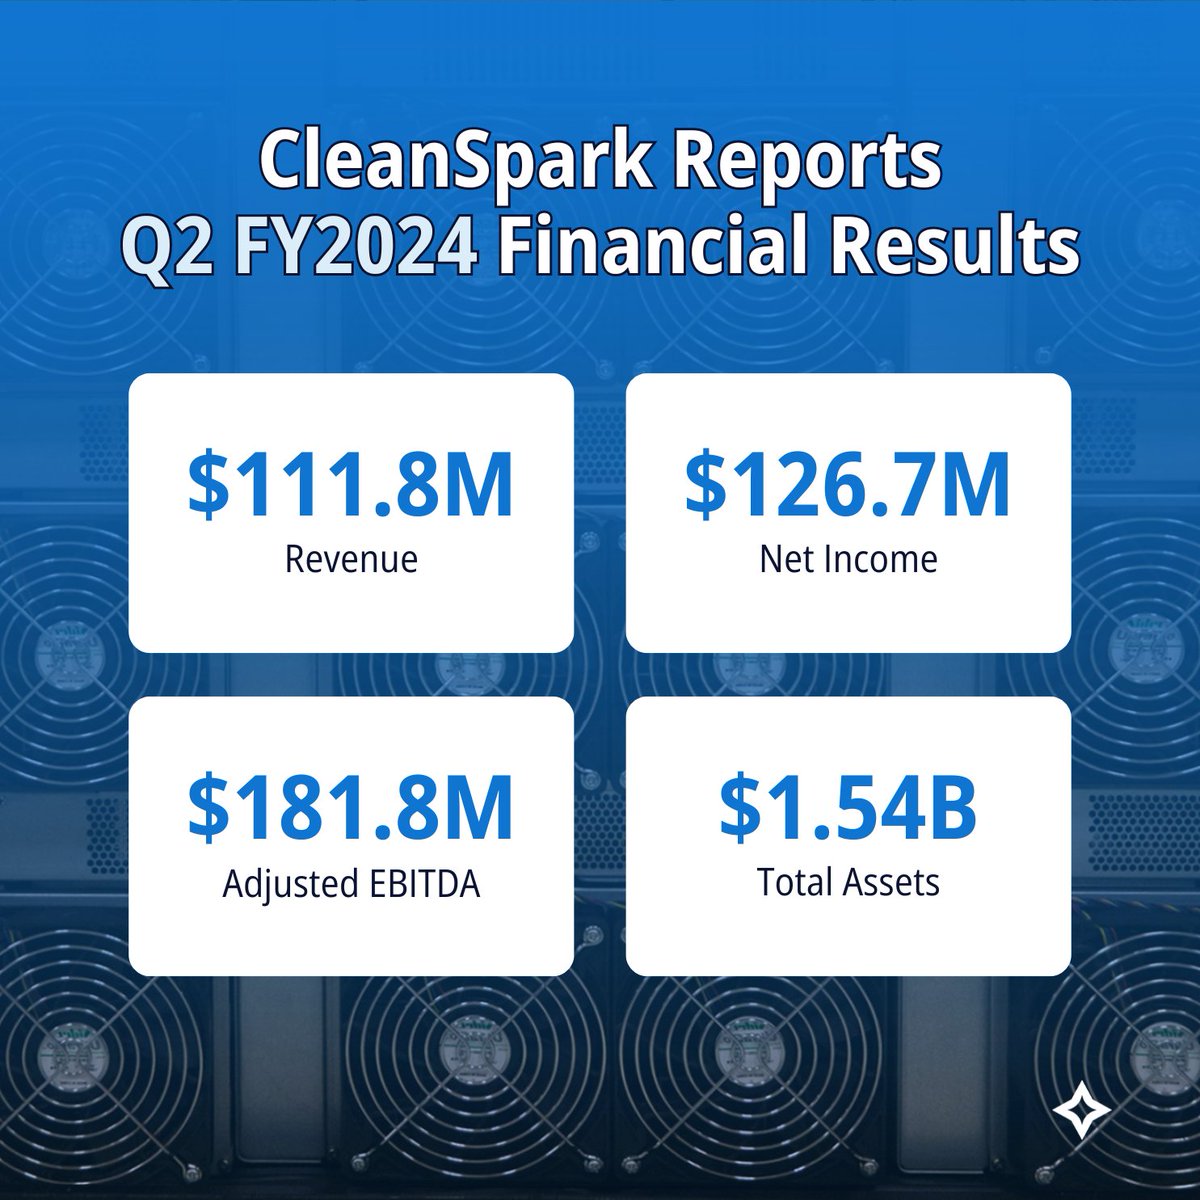 Introducing $CLSK's Q2 FY2024 financial results ended March 31, 2024: *Revenue: $111.8 million *Net Income: $126.7 million *Adjusted EBITDA: $181.8 million *Total Assets: $1.54 billion Revenue grew by 163% YoY and our current #bitcoin mining #hashrate surpasses 17 EH/s. Read…